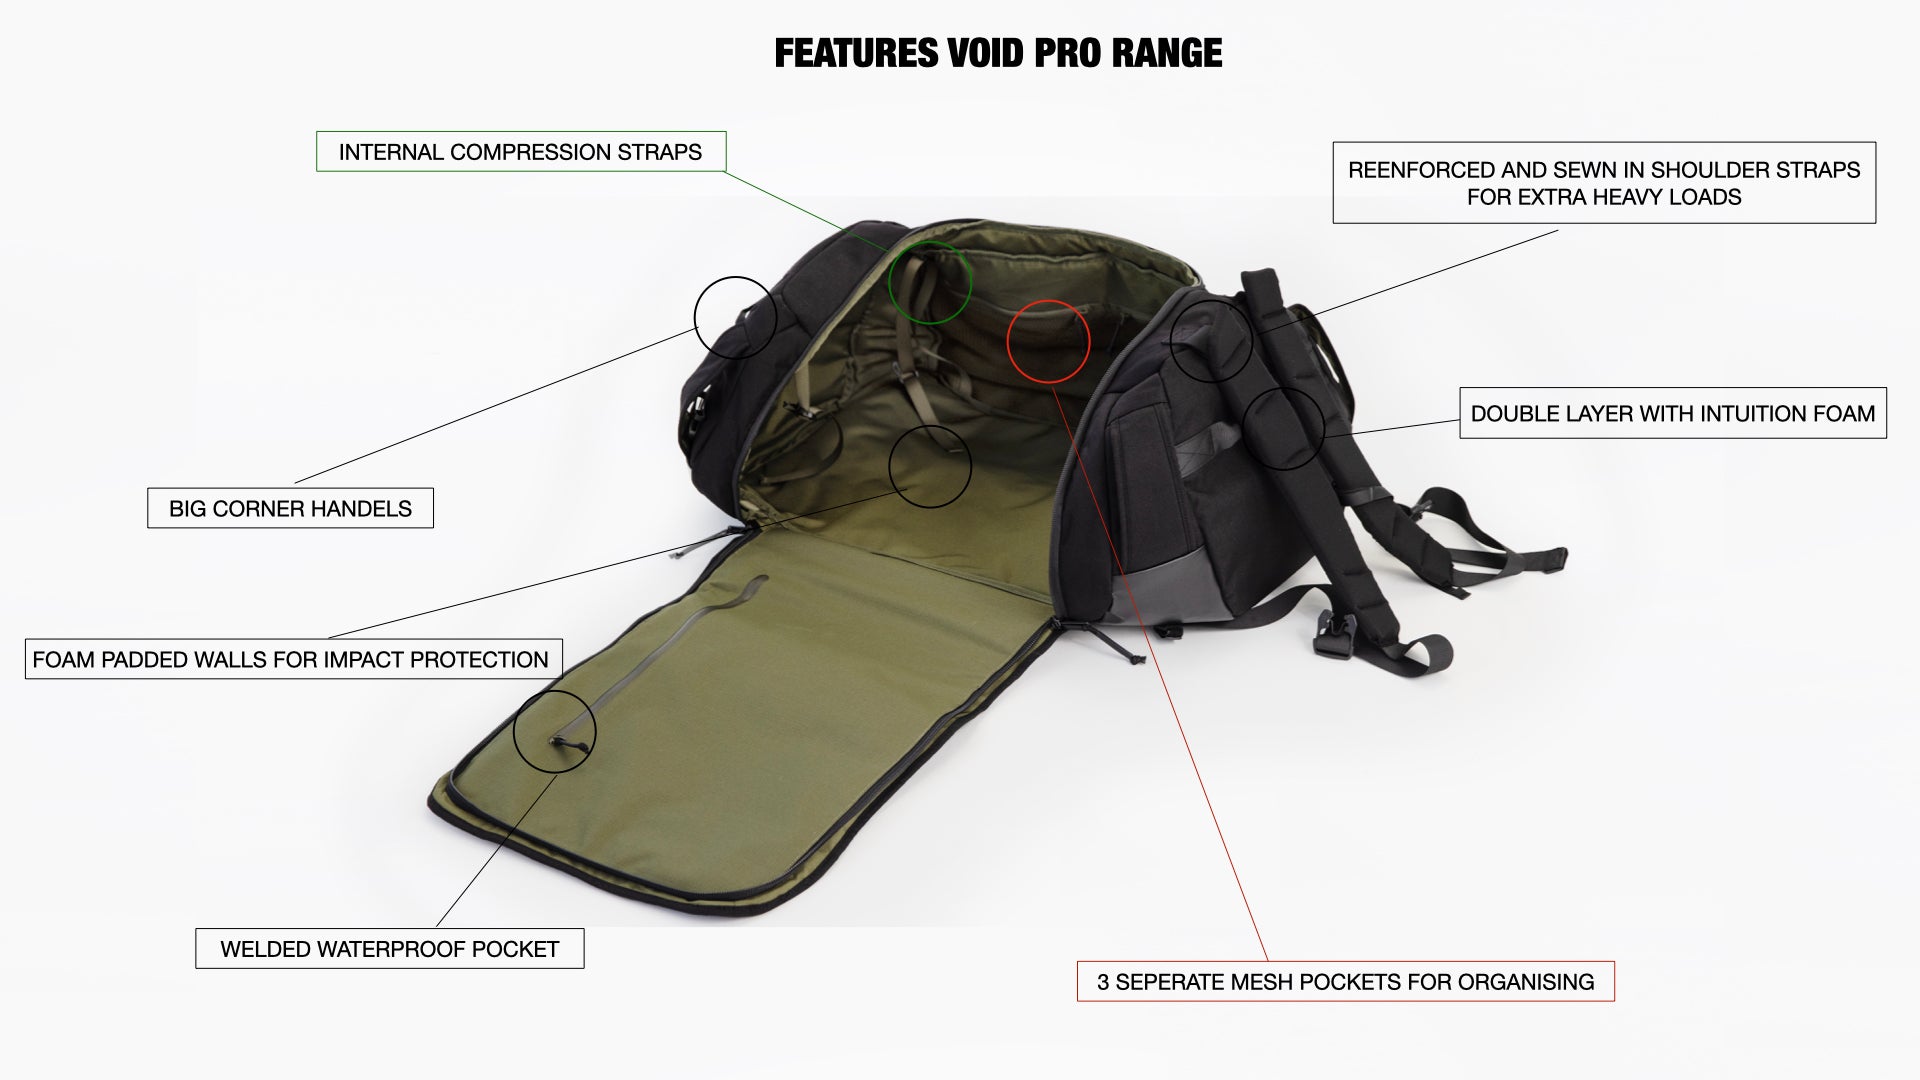 SHOWS FEATURES ON THE VOID 110 PRO BLACK AND RANGER GREEN